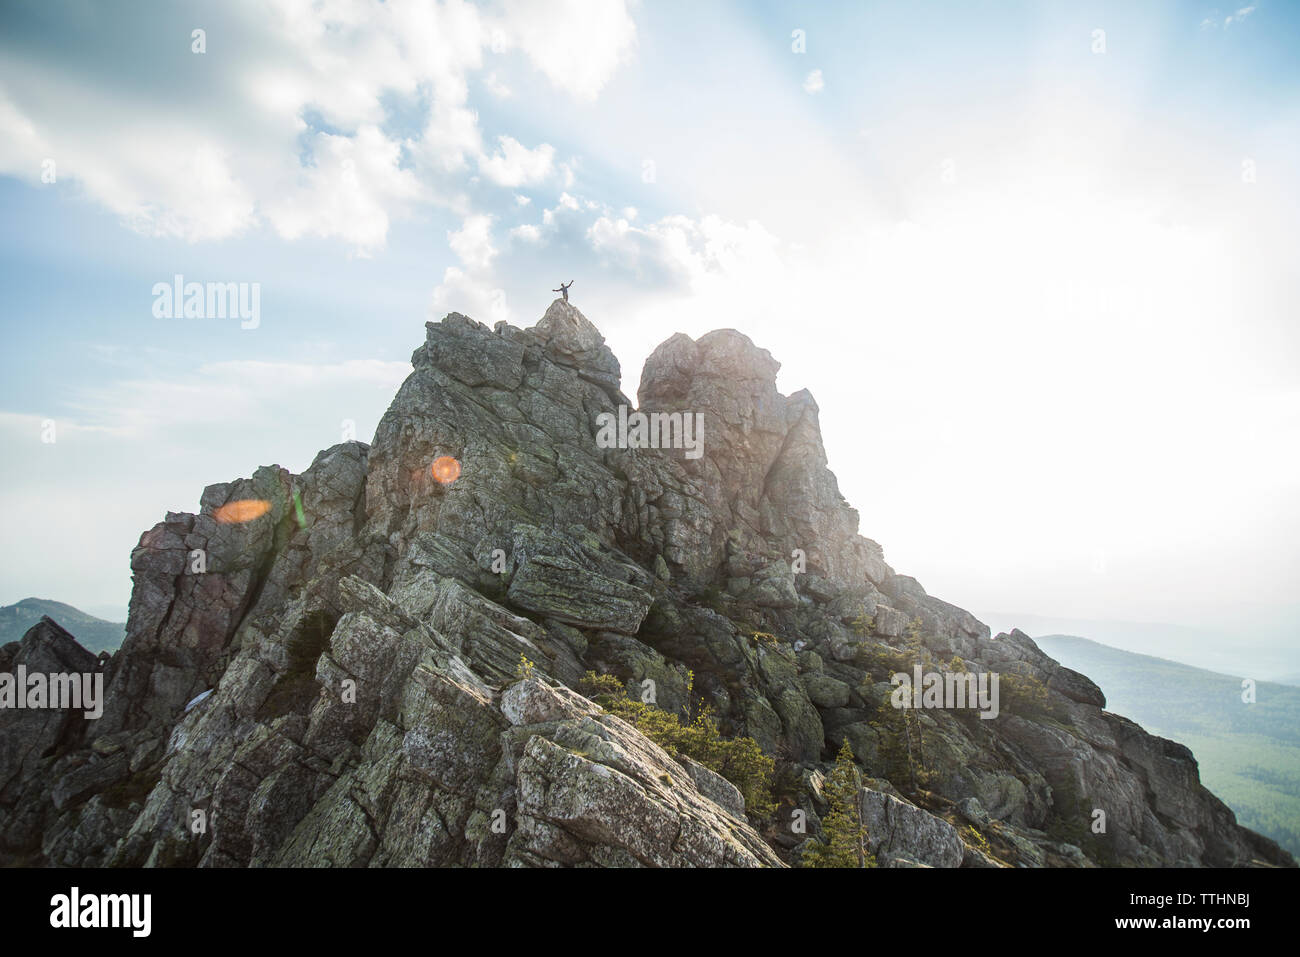 Distant view of hiker standing on mountain against cloudy sky Stock Photo